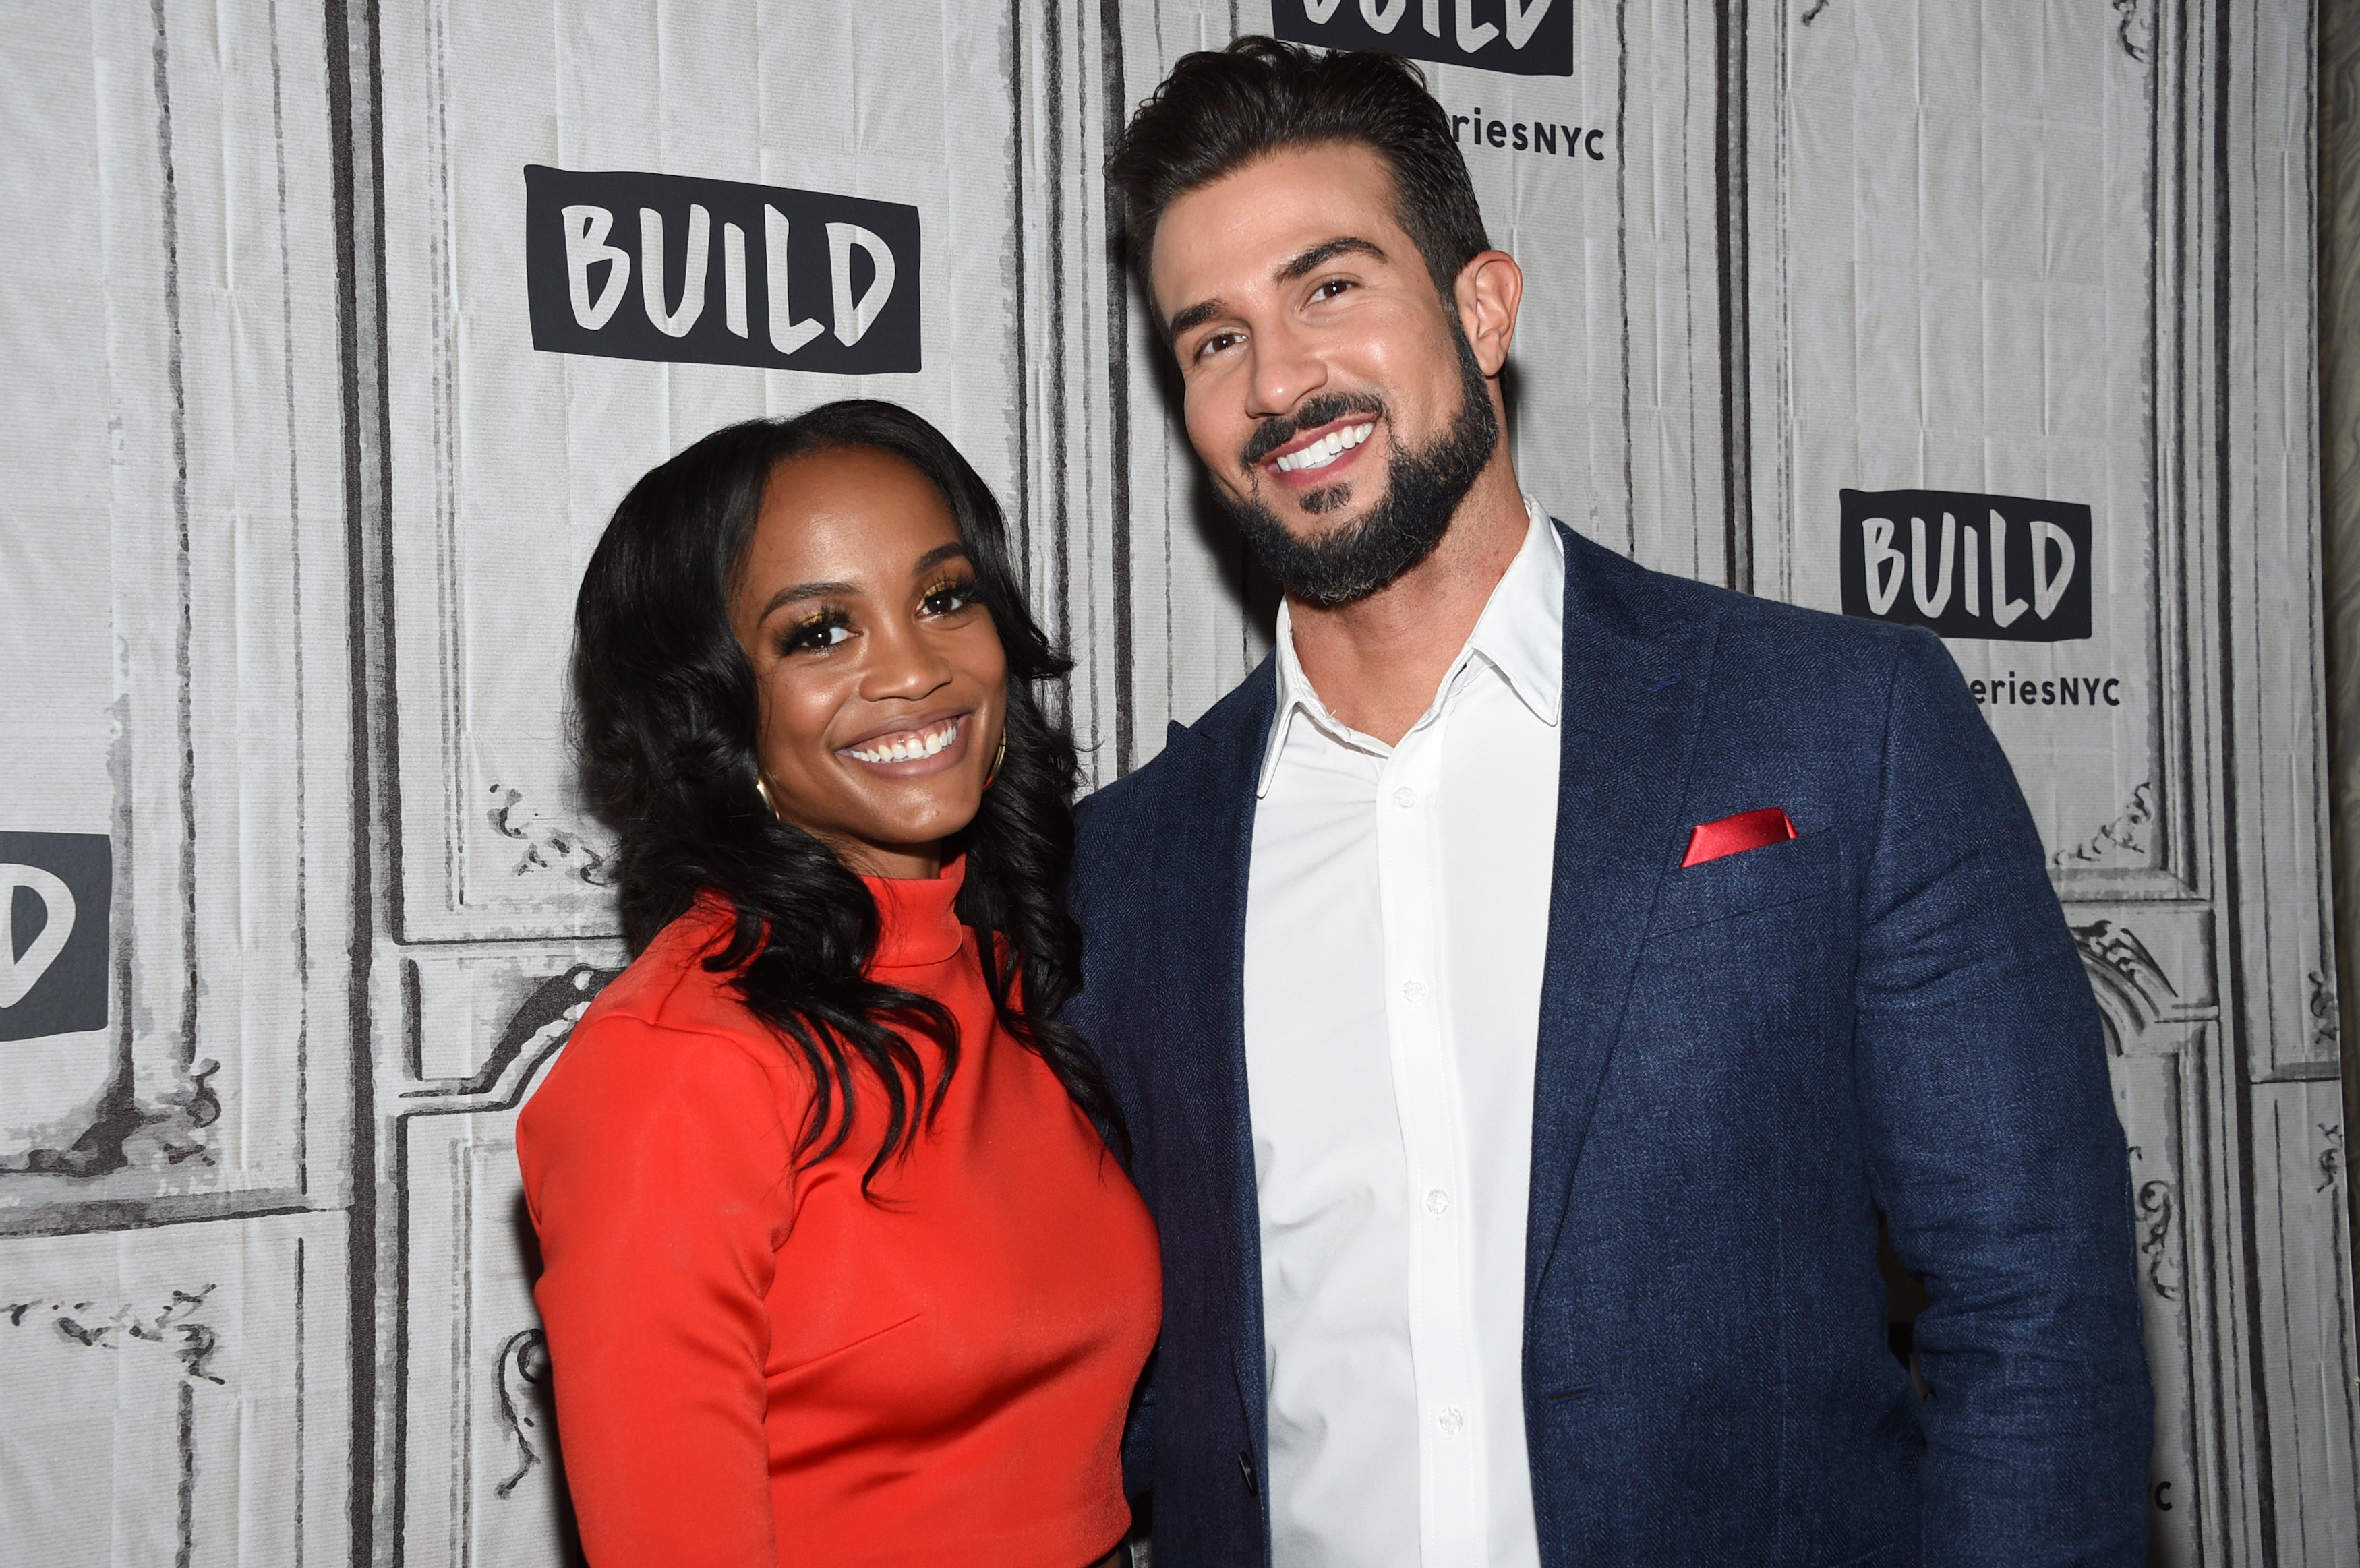 Bachelorette' Rachel Lindsay's husband, Bryan Abasolo, files for divorce after 4 years of marriage | The Independent